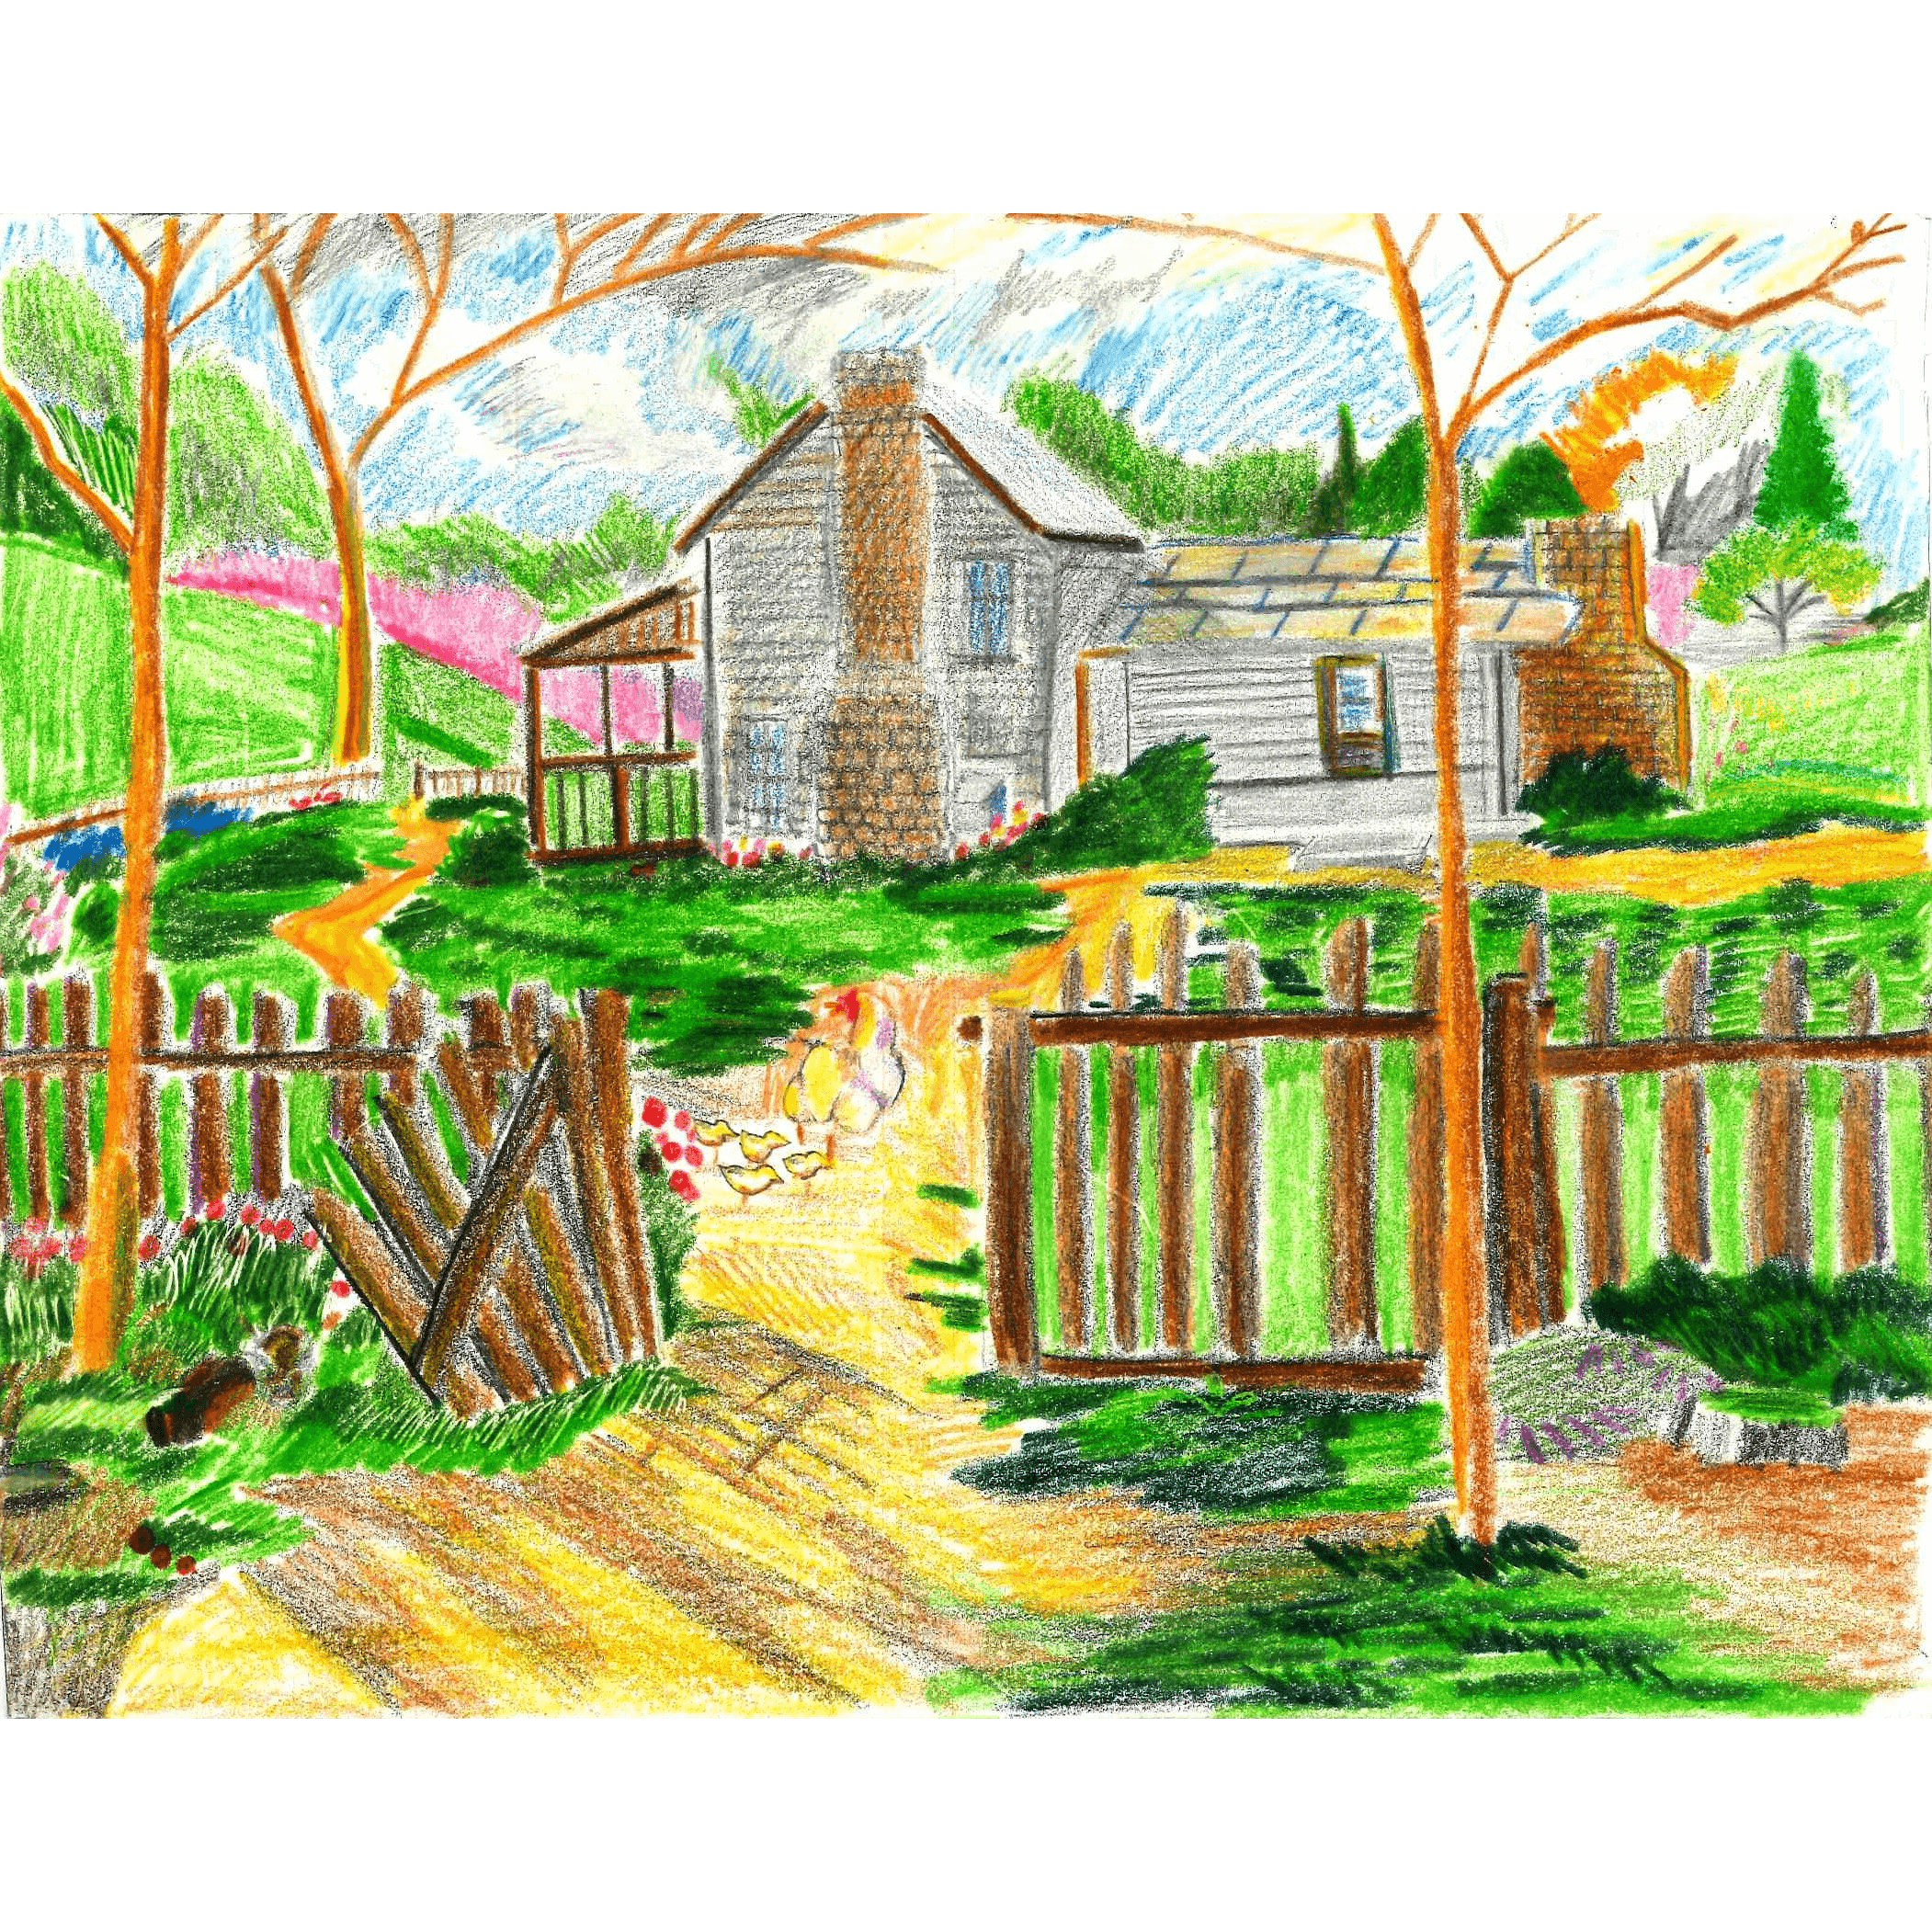 Spring drawing (chickens) by Darryl Richards